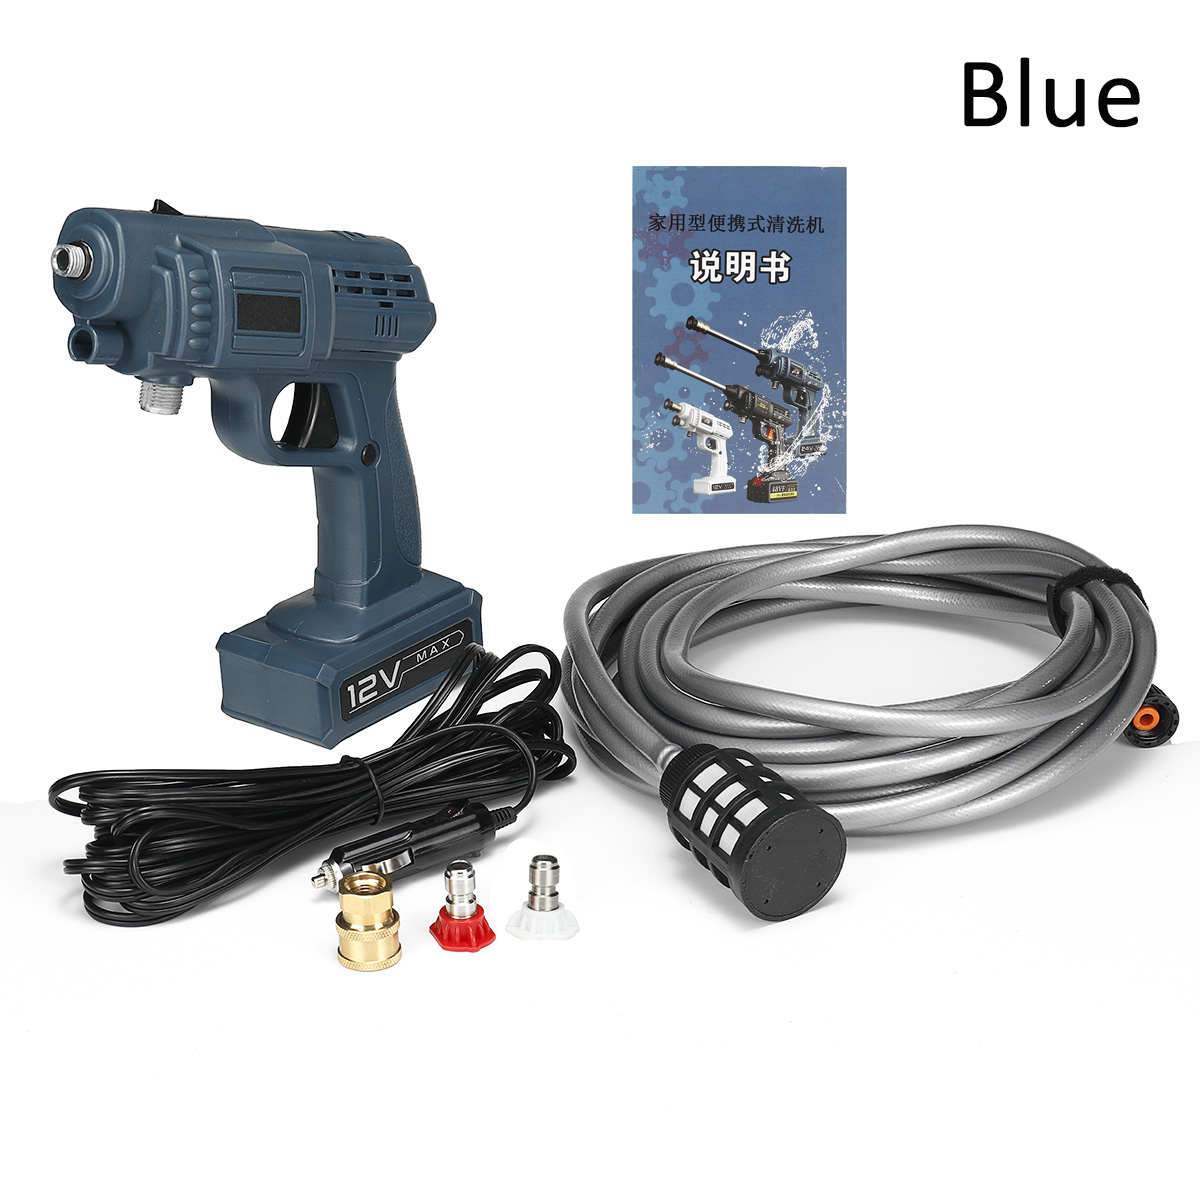 12V-High-Pressure-Washer-Wireless-Car-Washing-Guns-Machine-Garden-Cleaning-Jet-Tool-Without-Battery-1834465-10